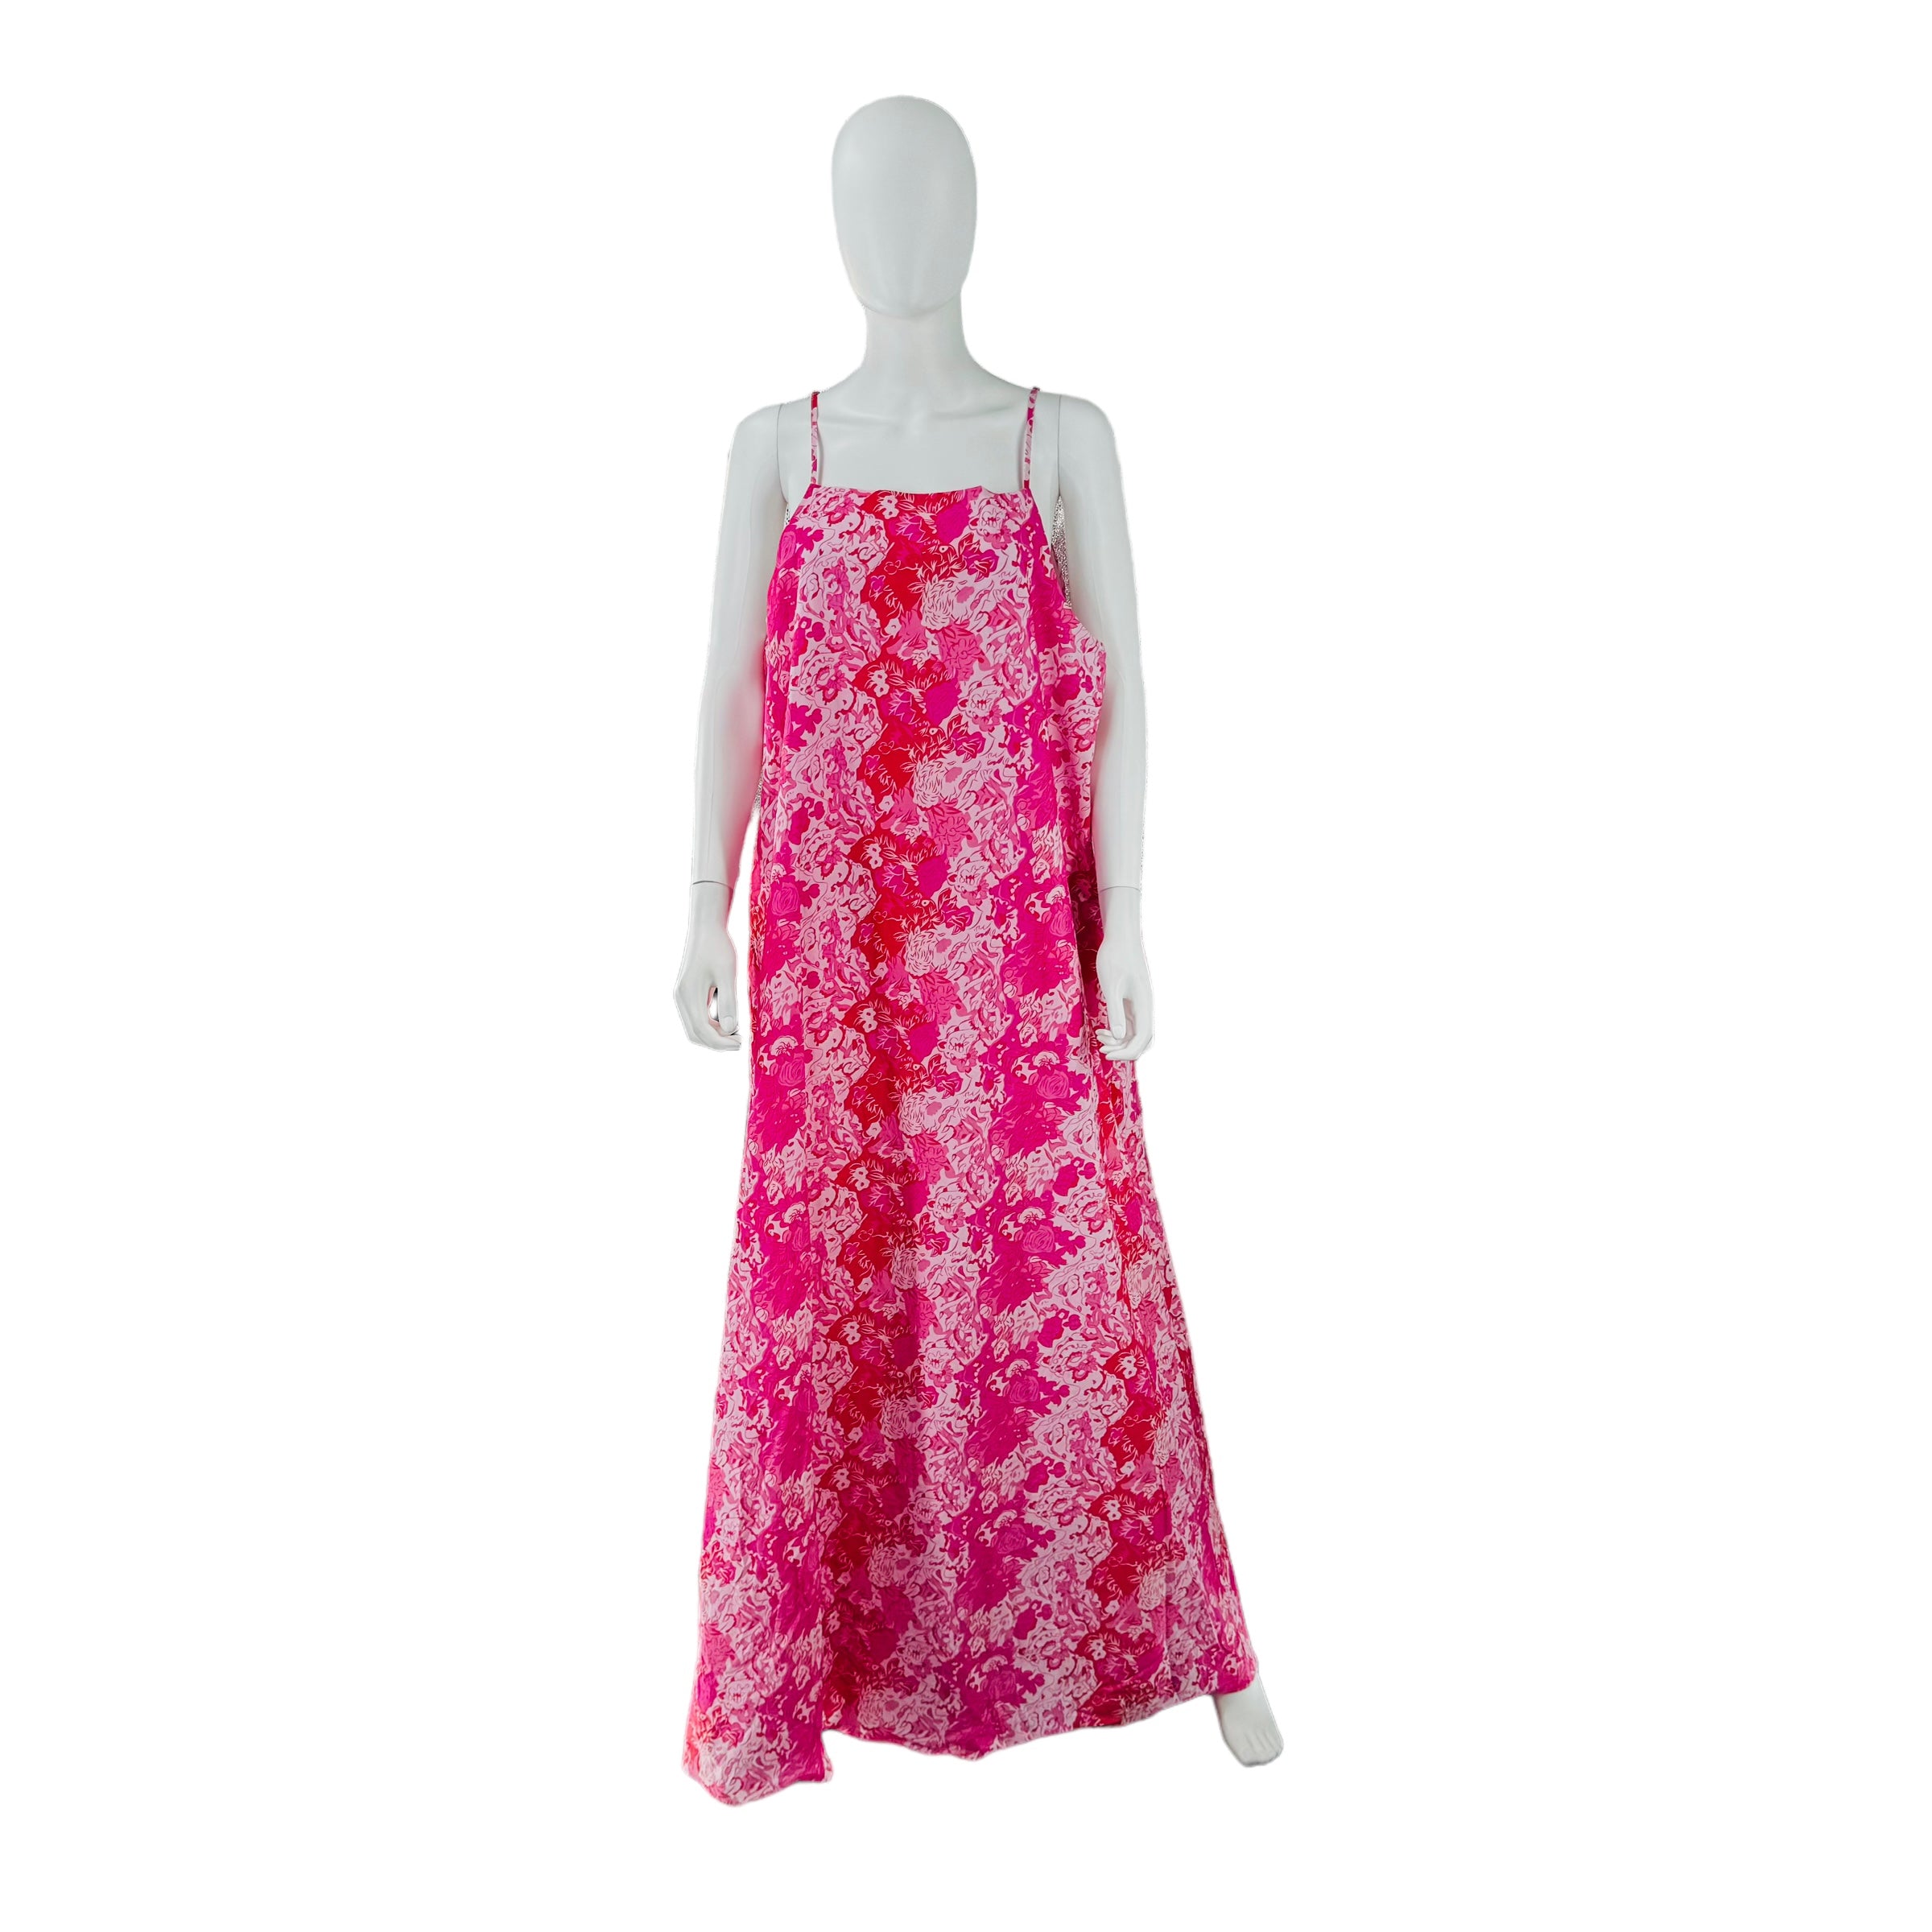 Hyacinth House Pink and Red Boho Floral High Neck Maxi Dress